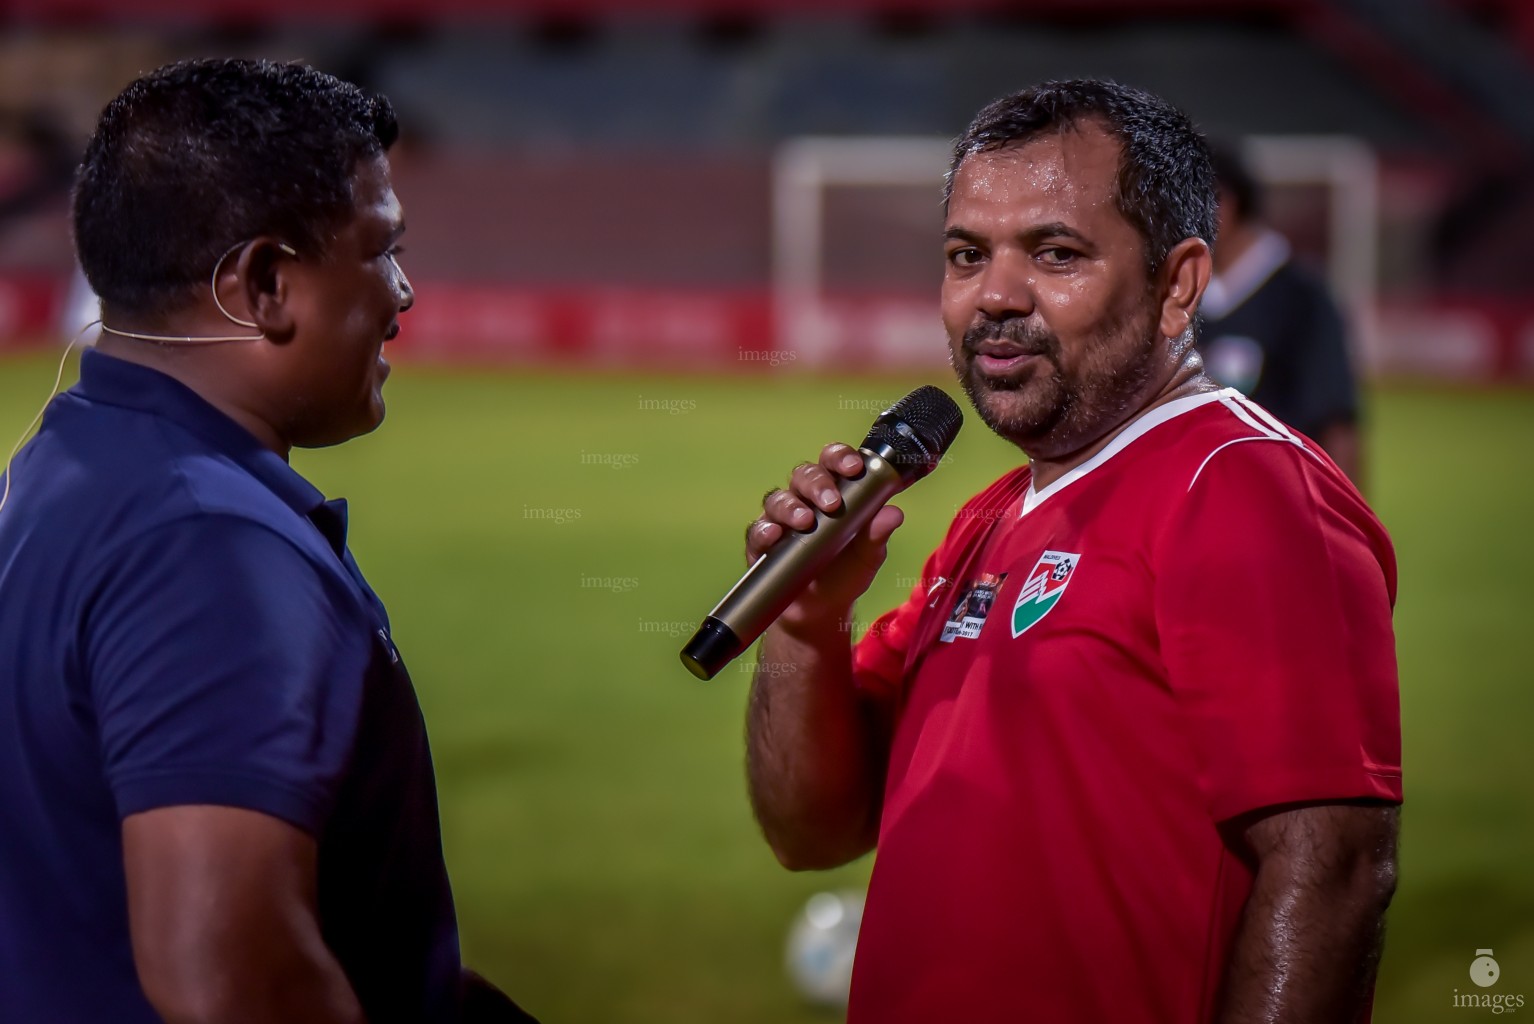 Charity Match played to Raise Funds for Rohingya